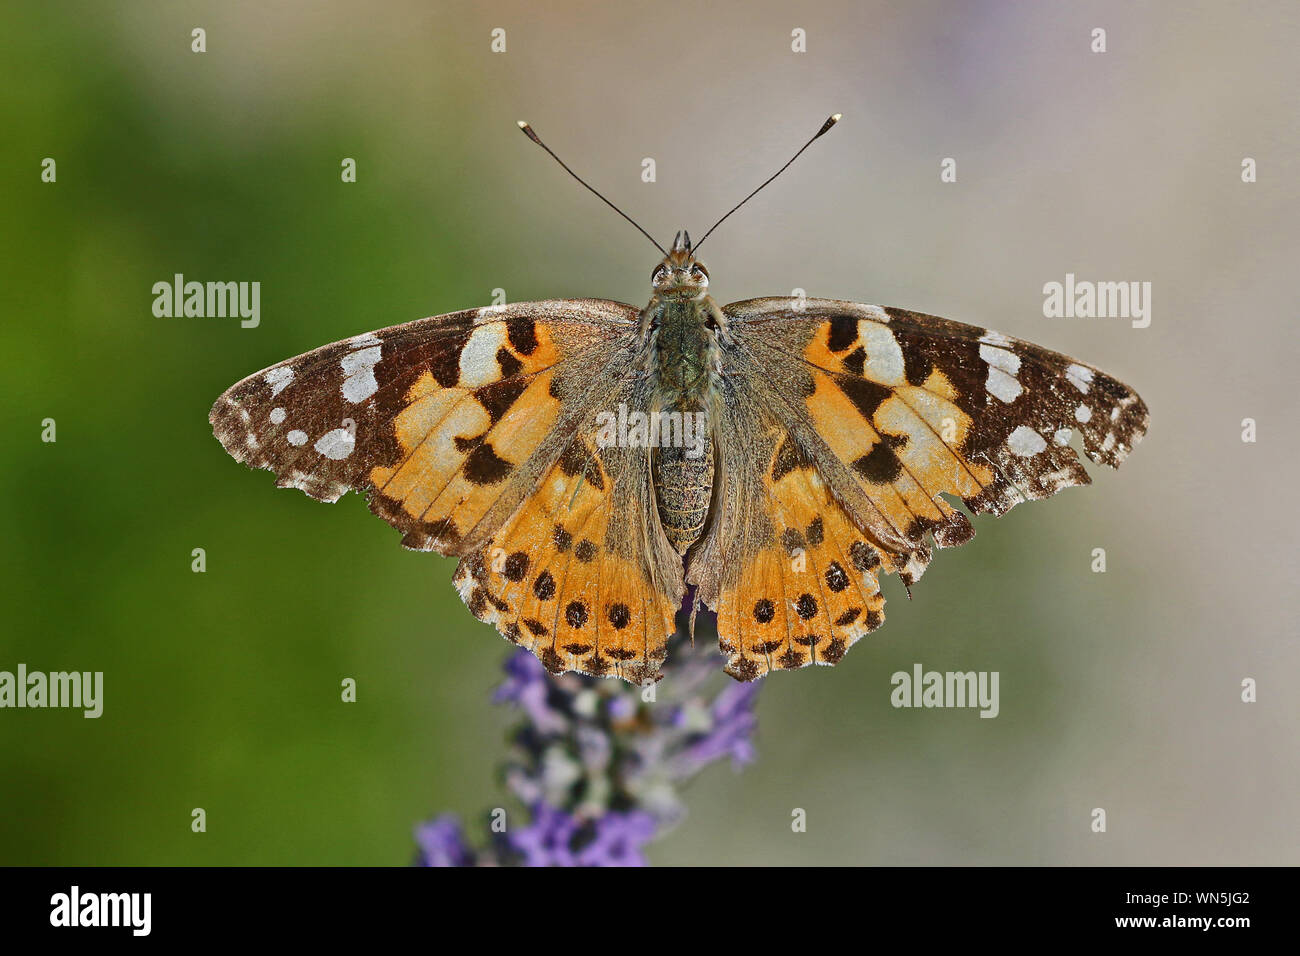 Painted lady butterfly in summer very close up Latin cynthia cardui or vanessa cardui feeding on a lavender bush or lavandula in Italy in summer Stock Photo